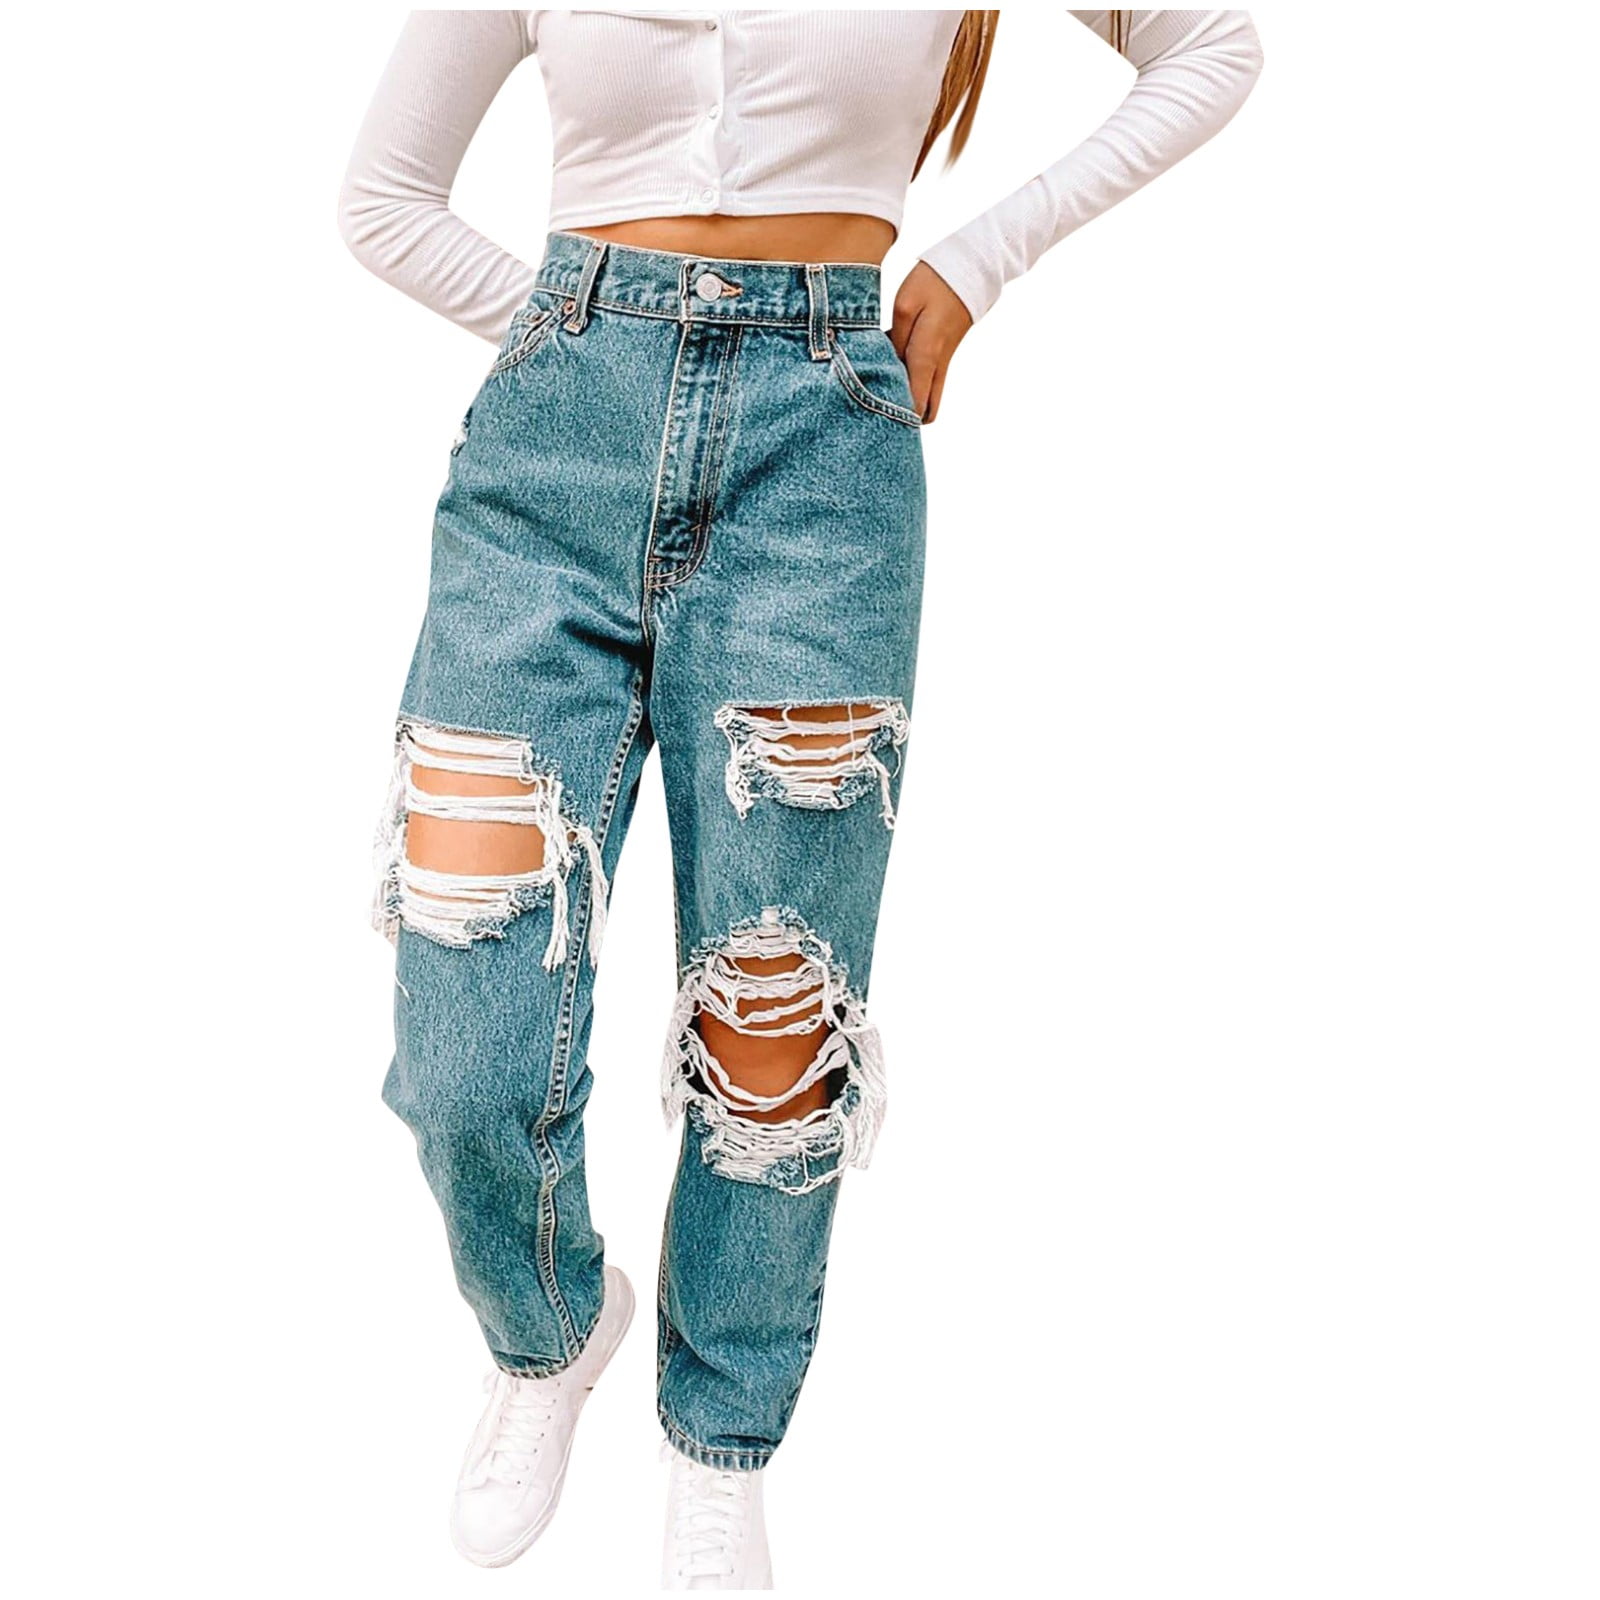 Women High Waisted Baggy Ripped Fashion Pocket Elastic JeansCurved flared jeans Walmart.com